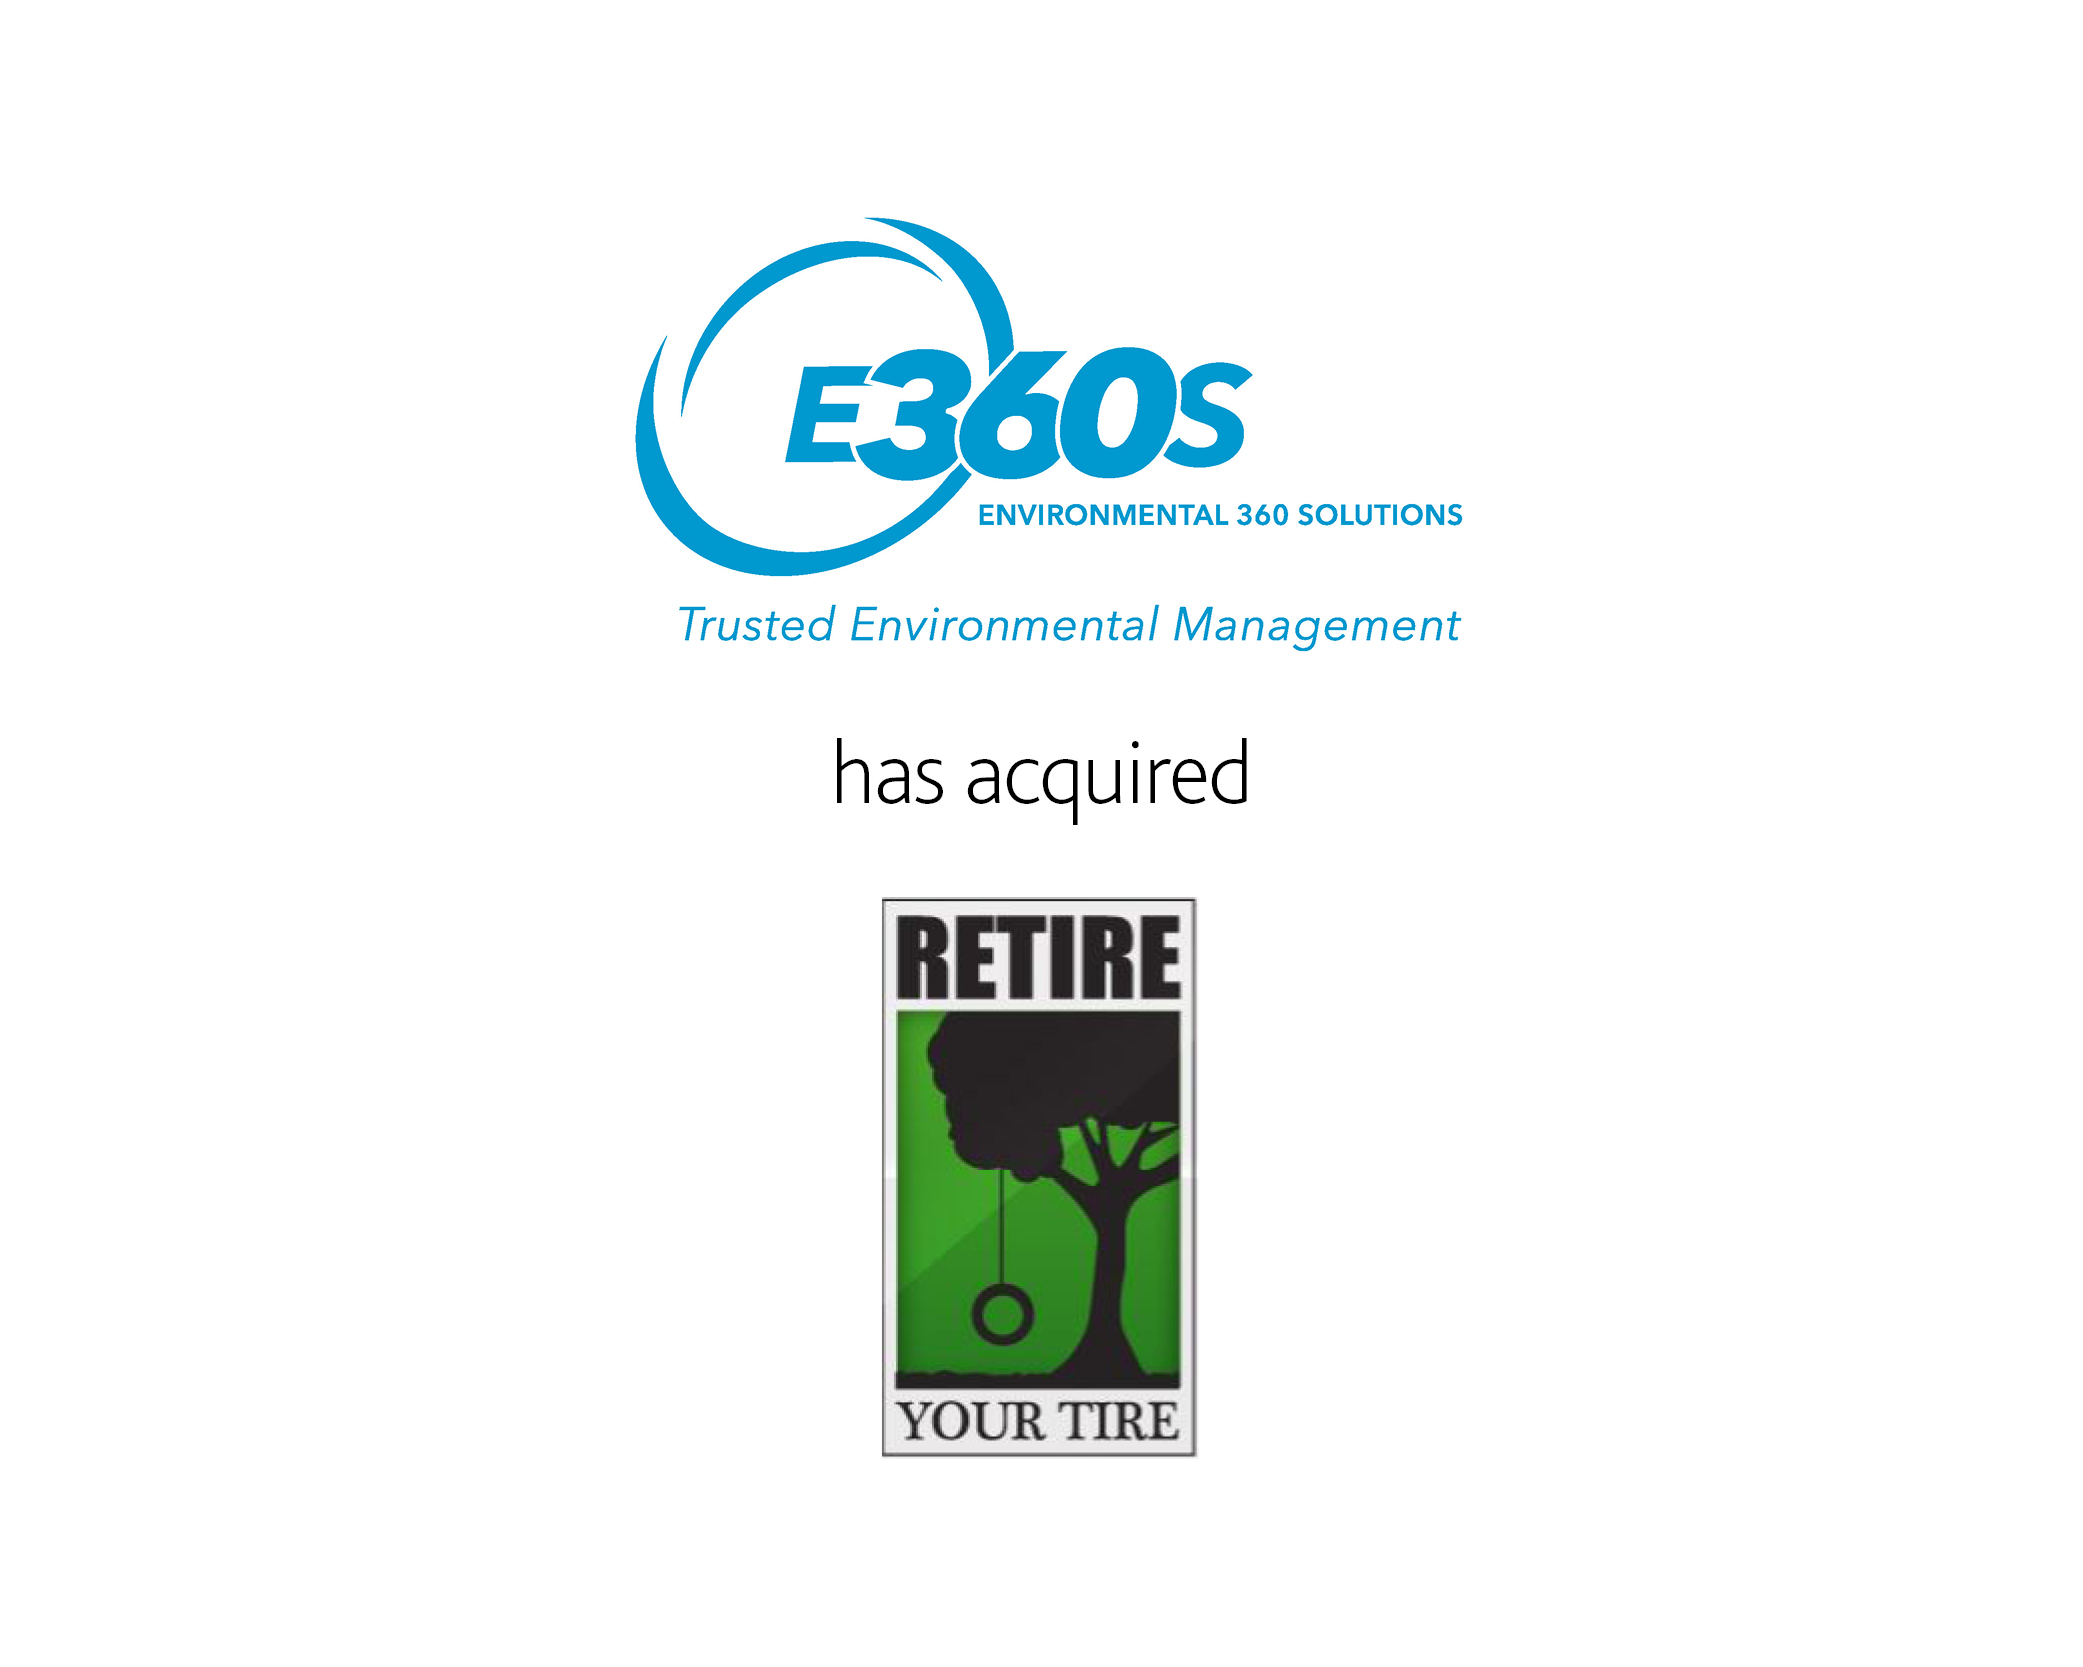 Environmental 360 Solutions Ltd. has acquired Retire Your Tire